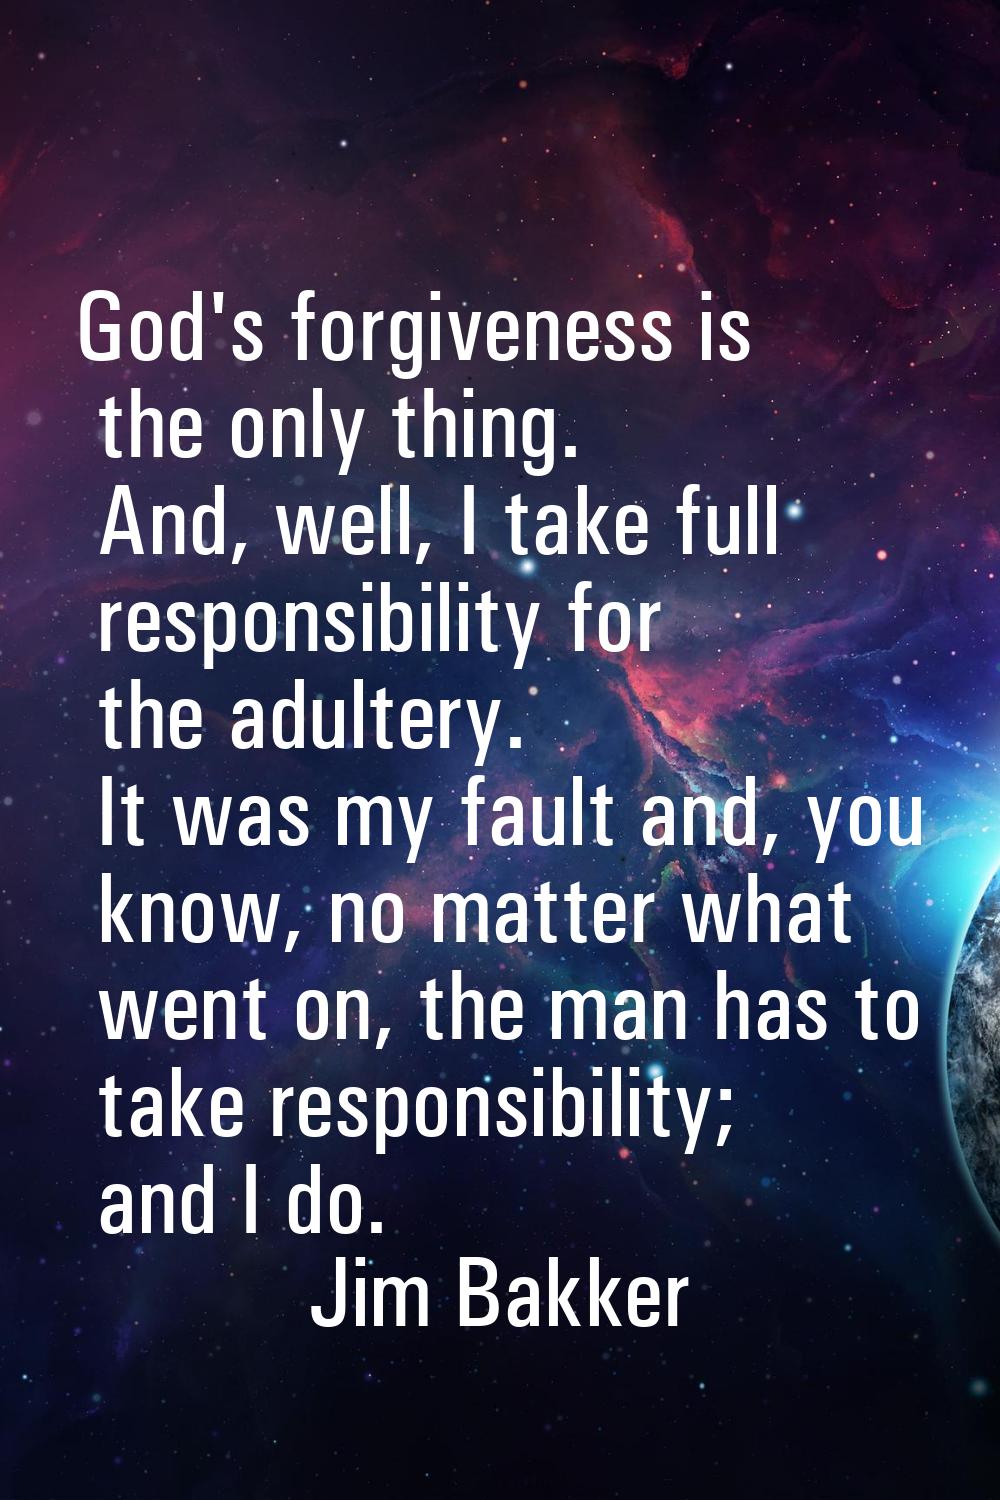 God's forgiveness is the only thing. And, well, I take full responsibility for the adultery. It was